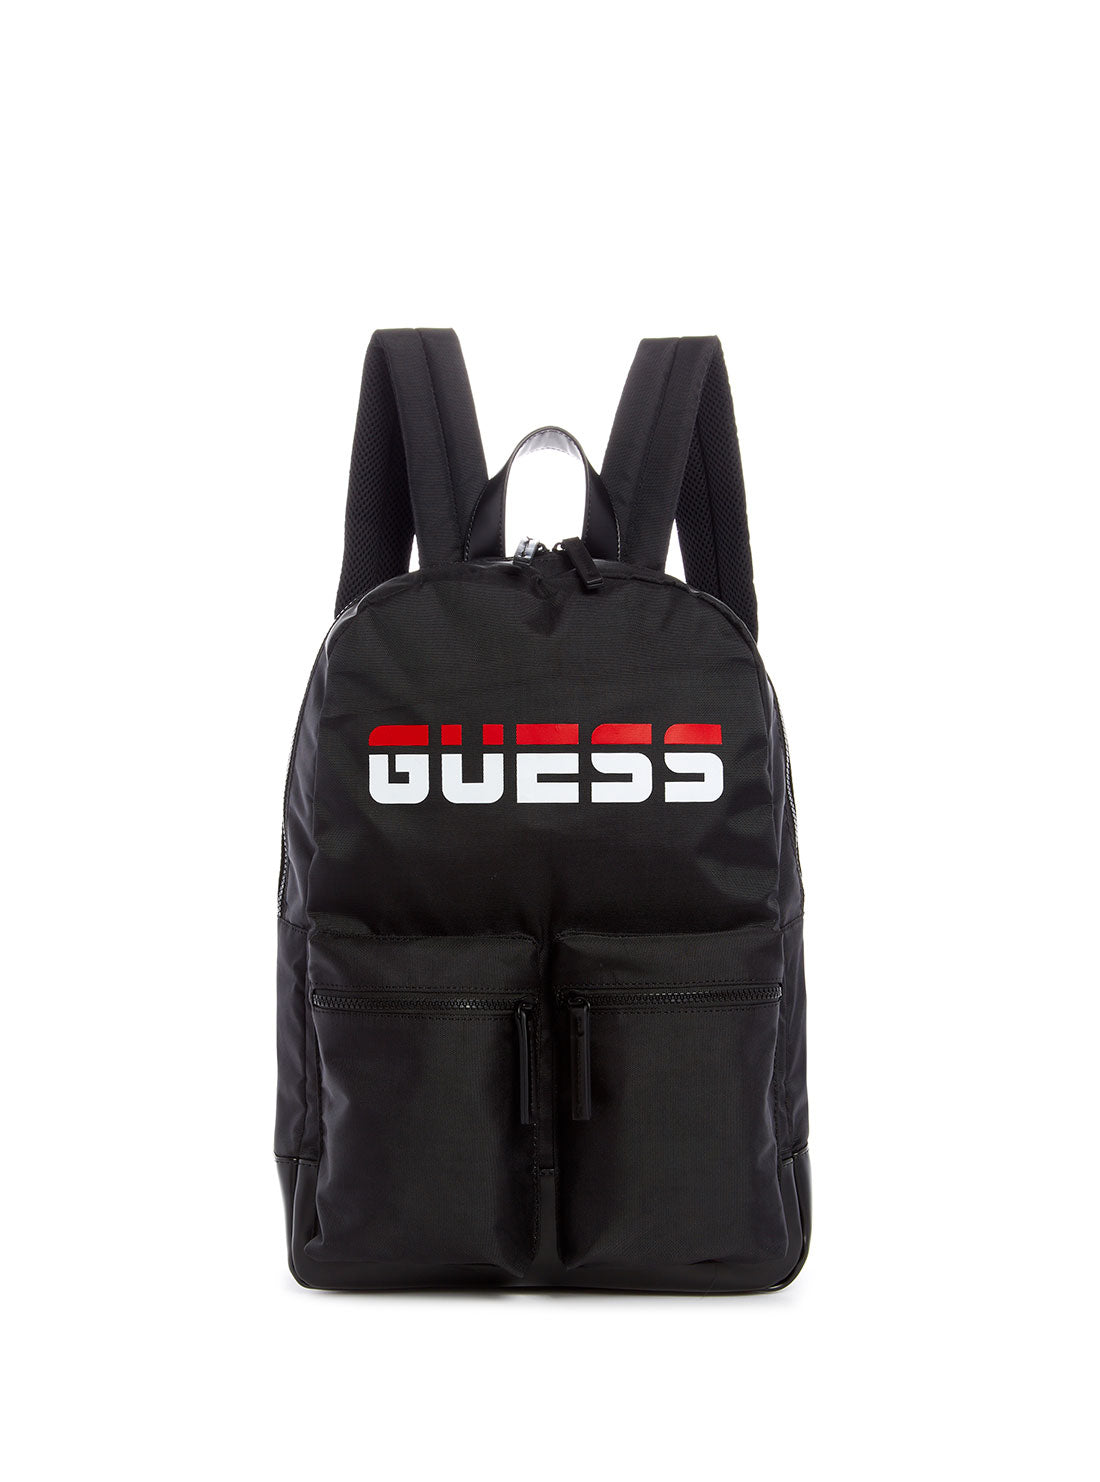 Black GUESS Duo Backpack front view